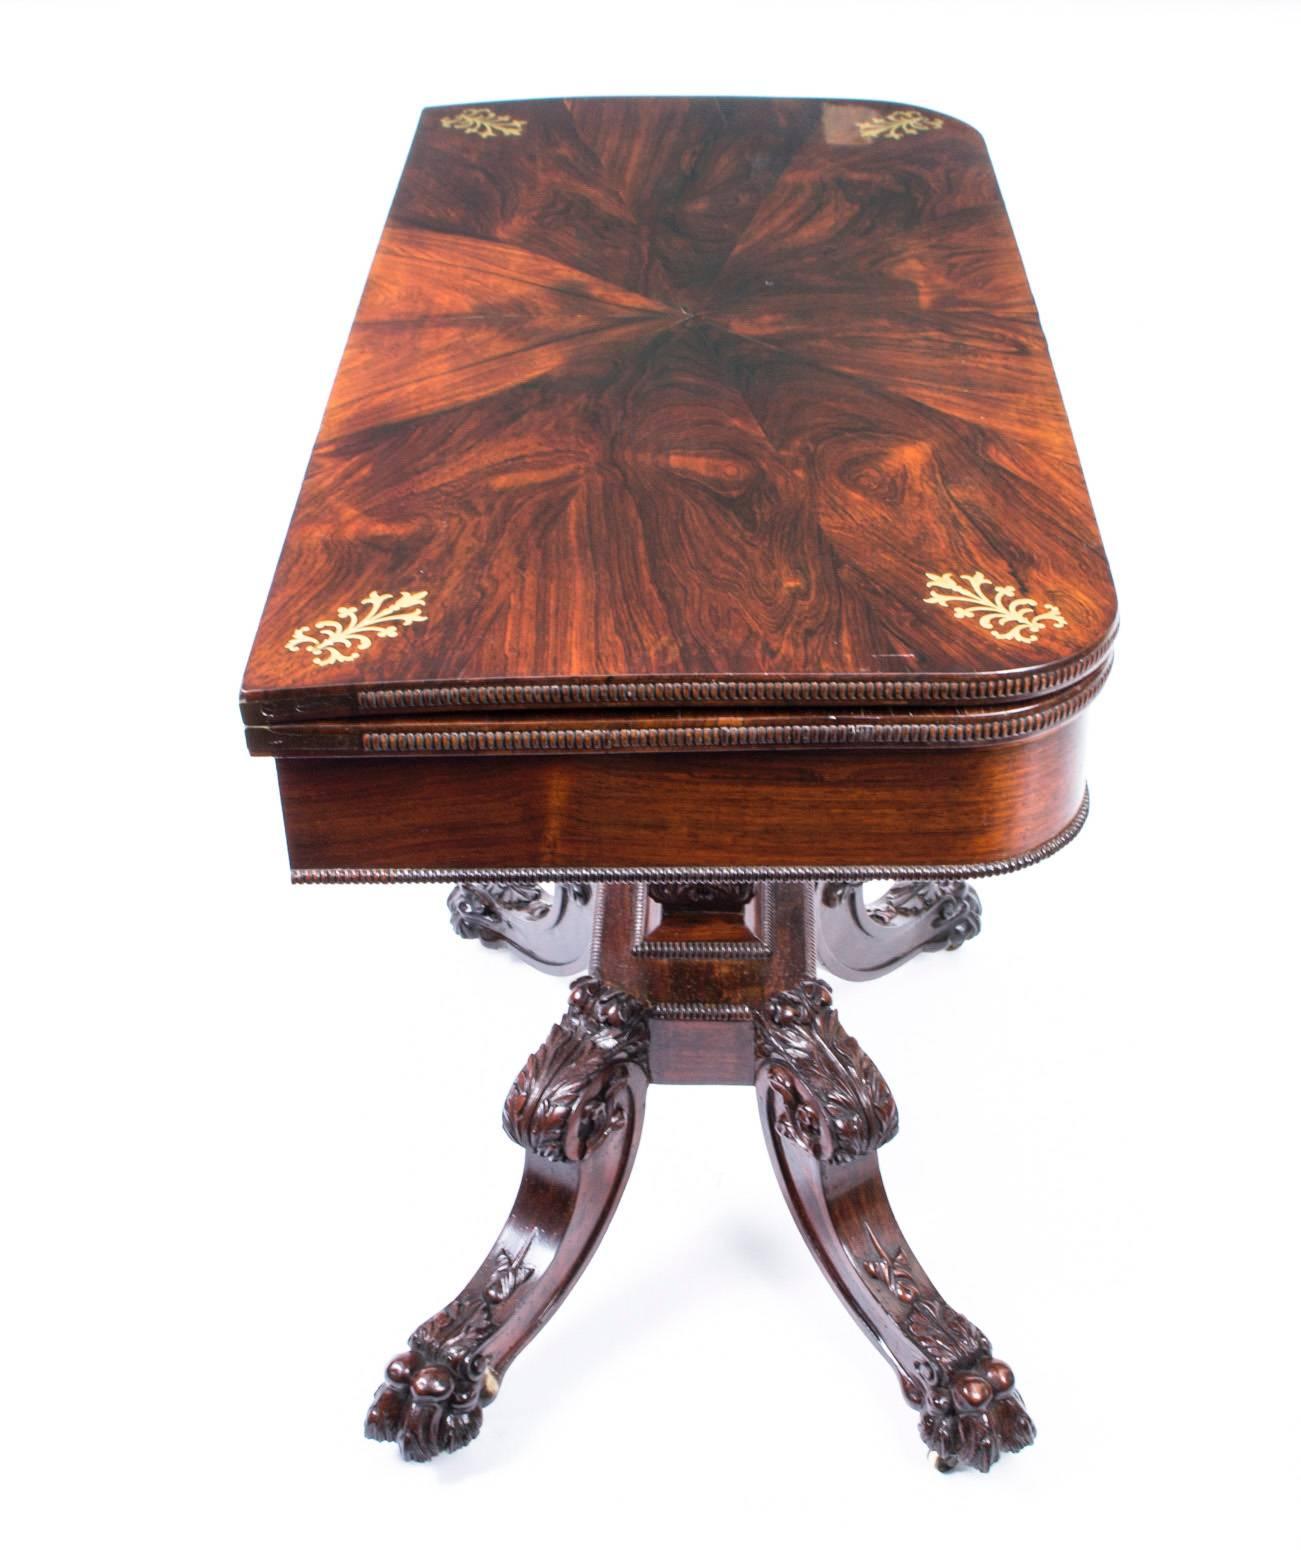 Early 19th Century 19th Century Regency Rosewood Brass Inlaid Card Table